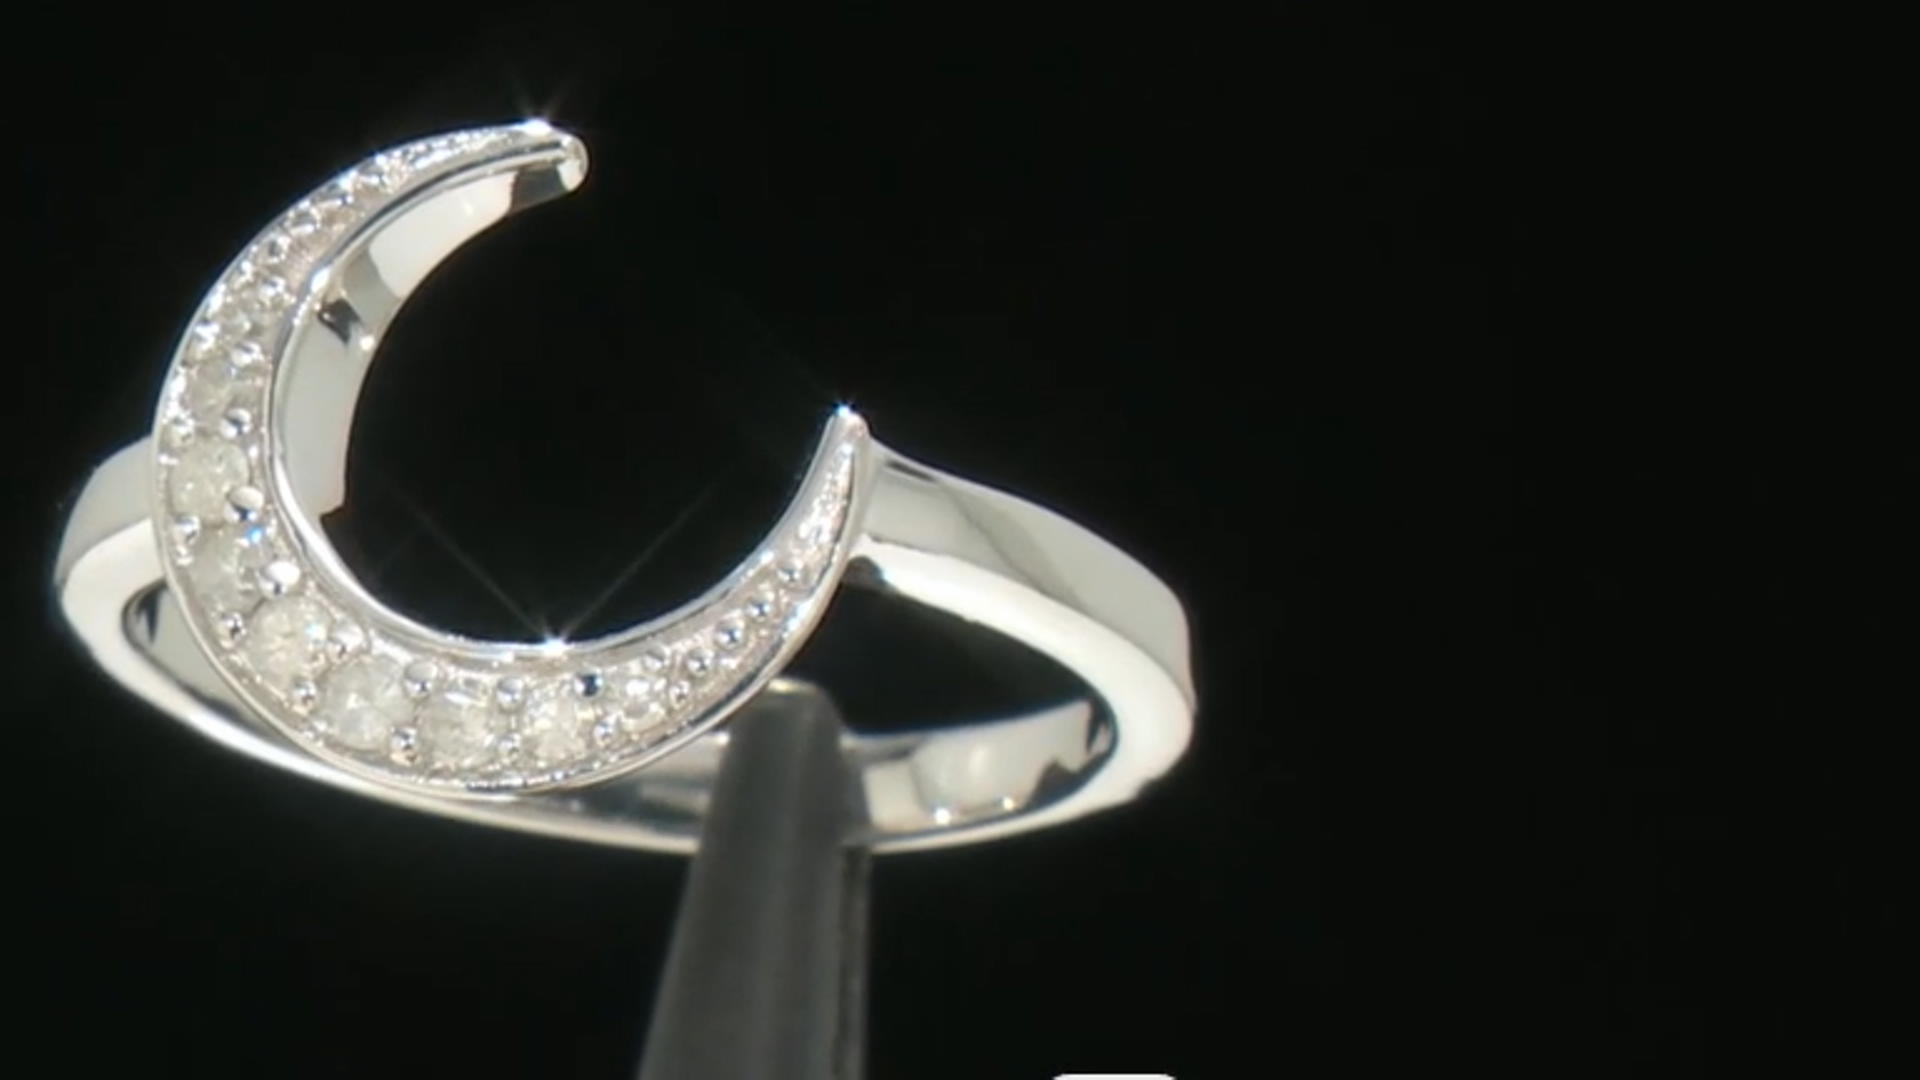 White Diamond Rhodium Over Sterling Silver Moon Ring 0.10ctw